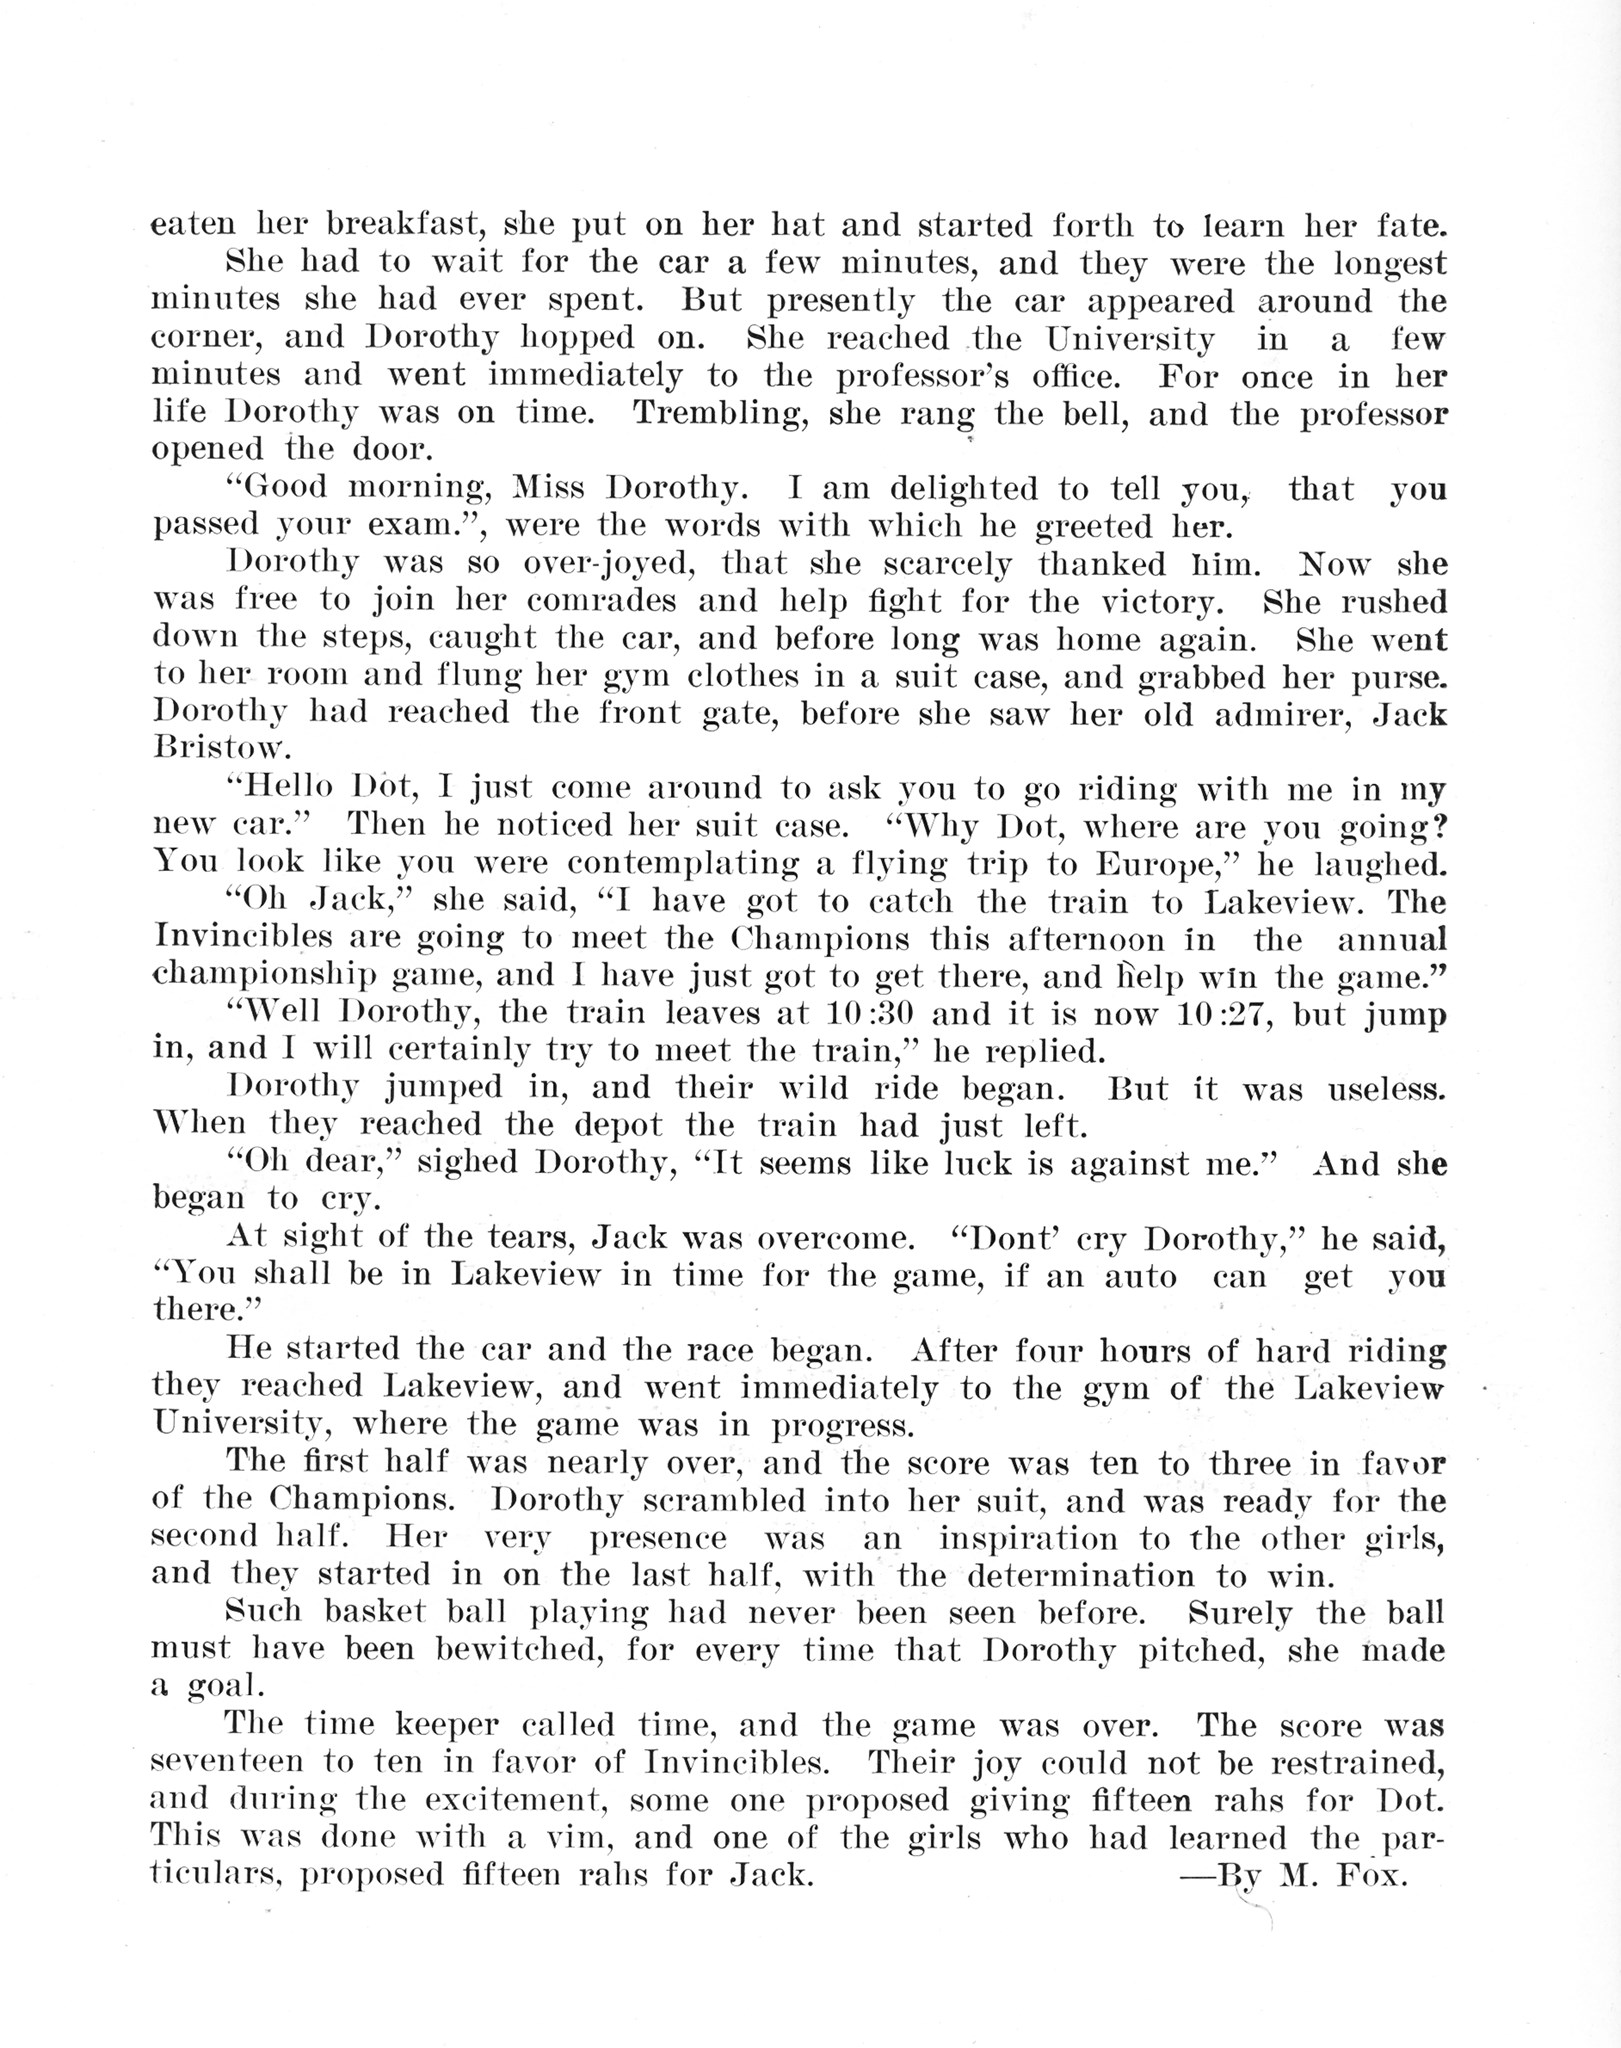 ../../../Images/Large/1913/Arclight-1913-pg0082.jpg